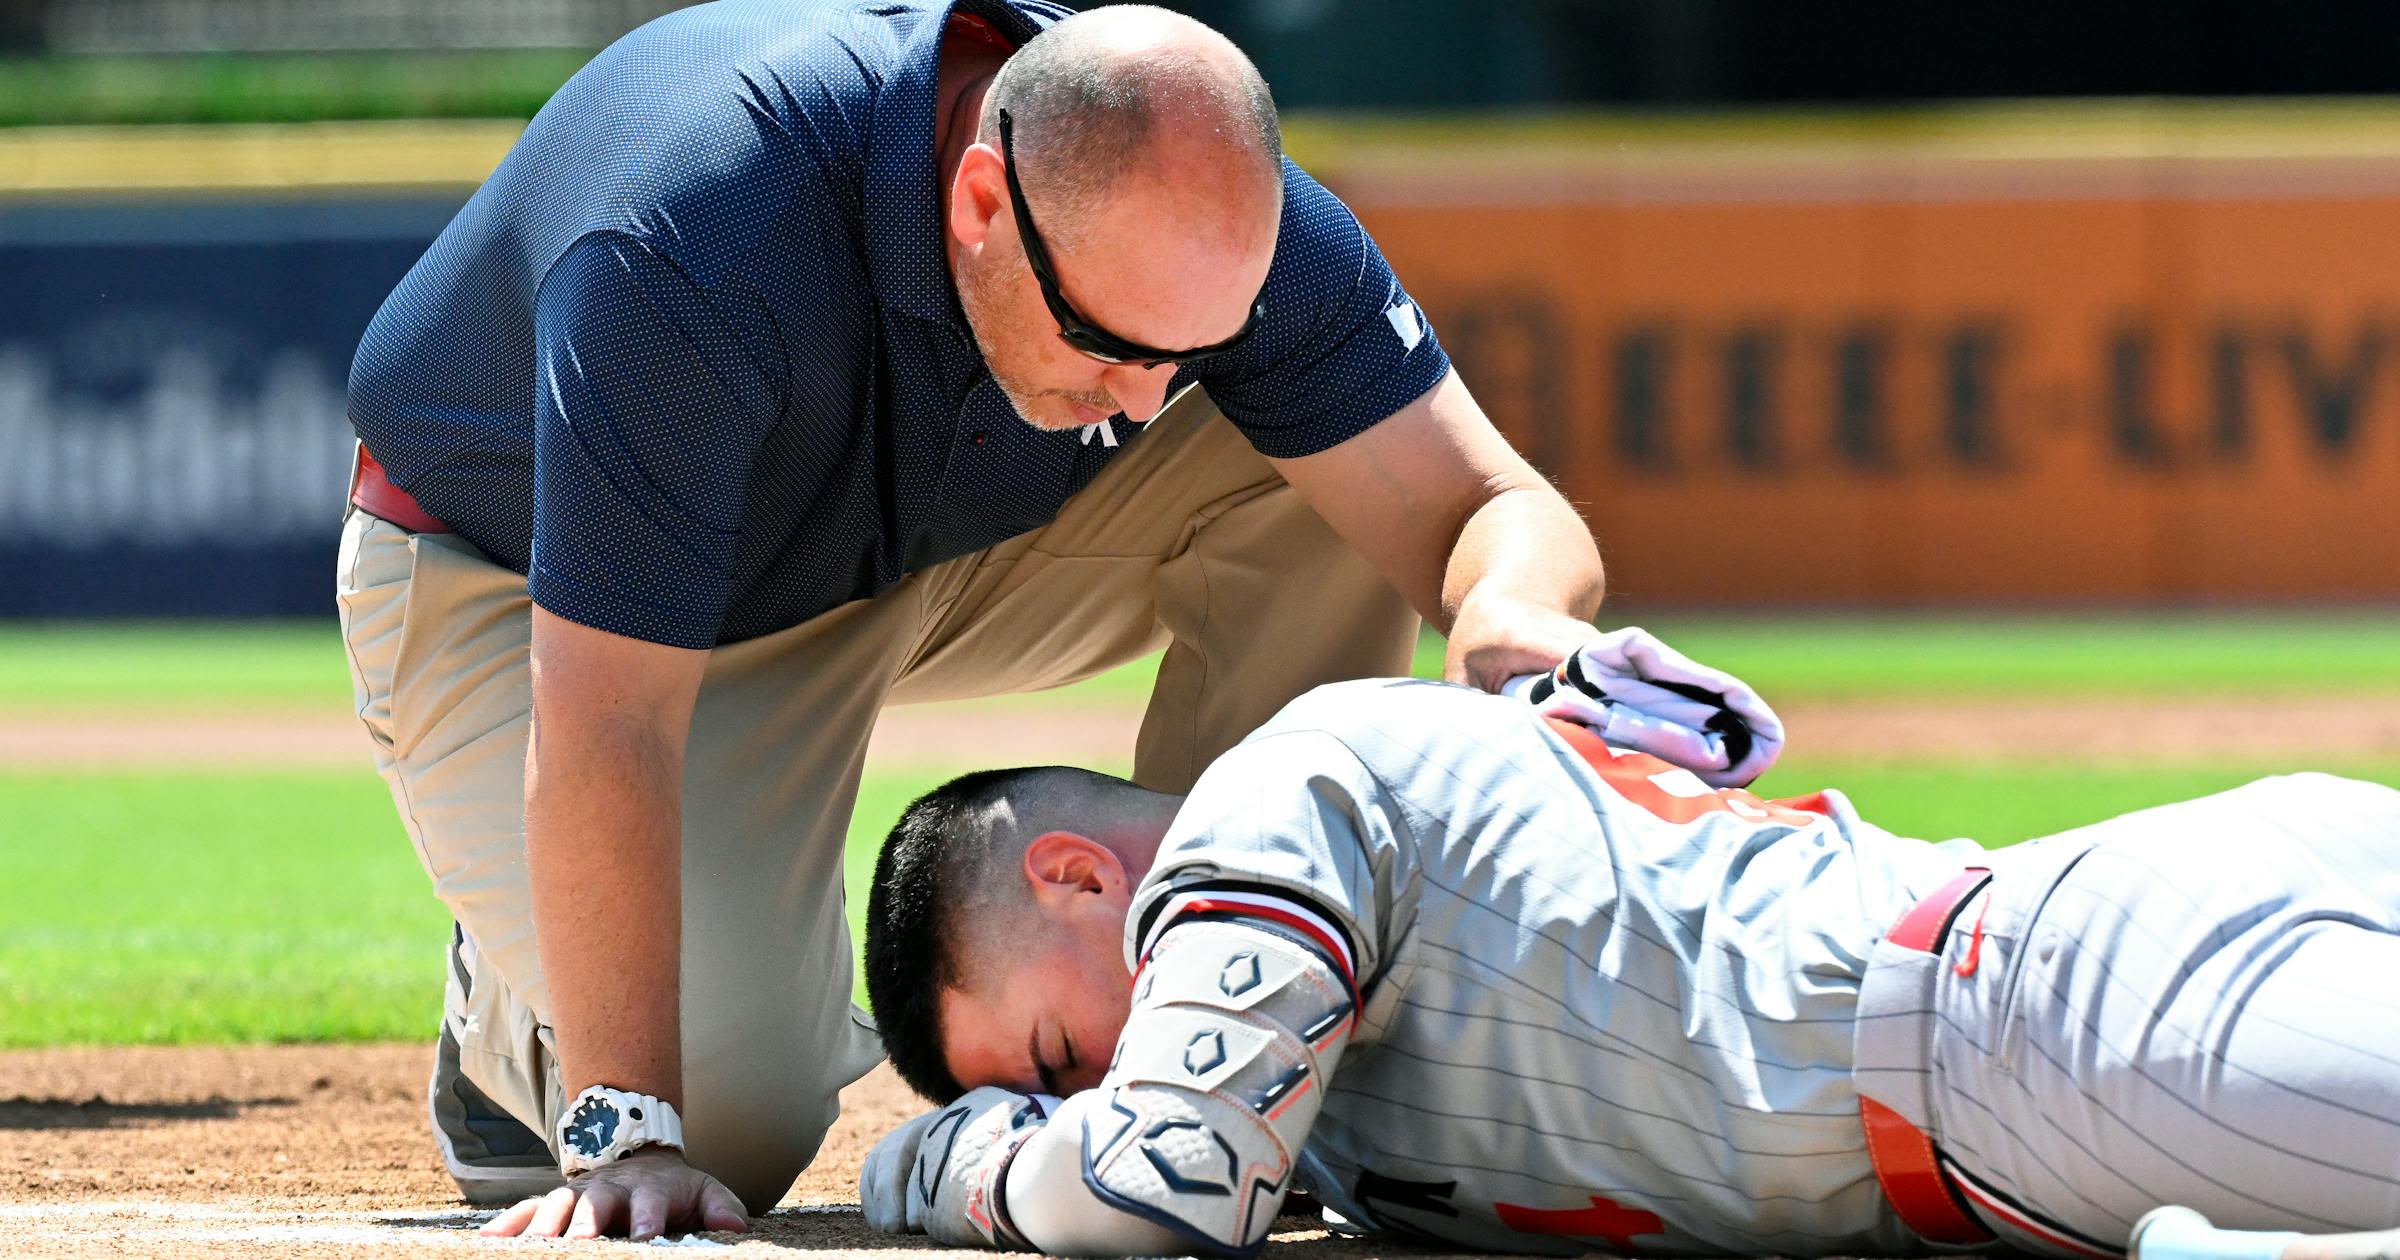 Twins’ Jose Miranda appears to escape serious injury after getting hit in helmet by pitch